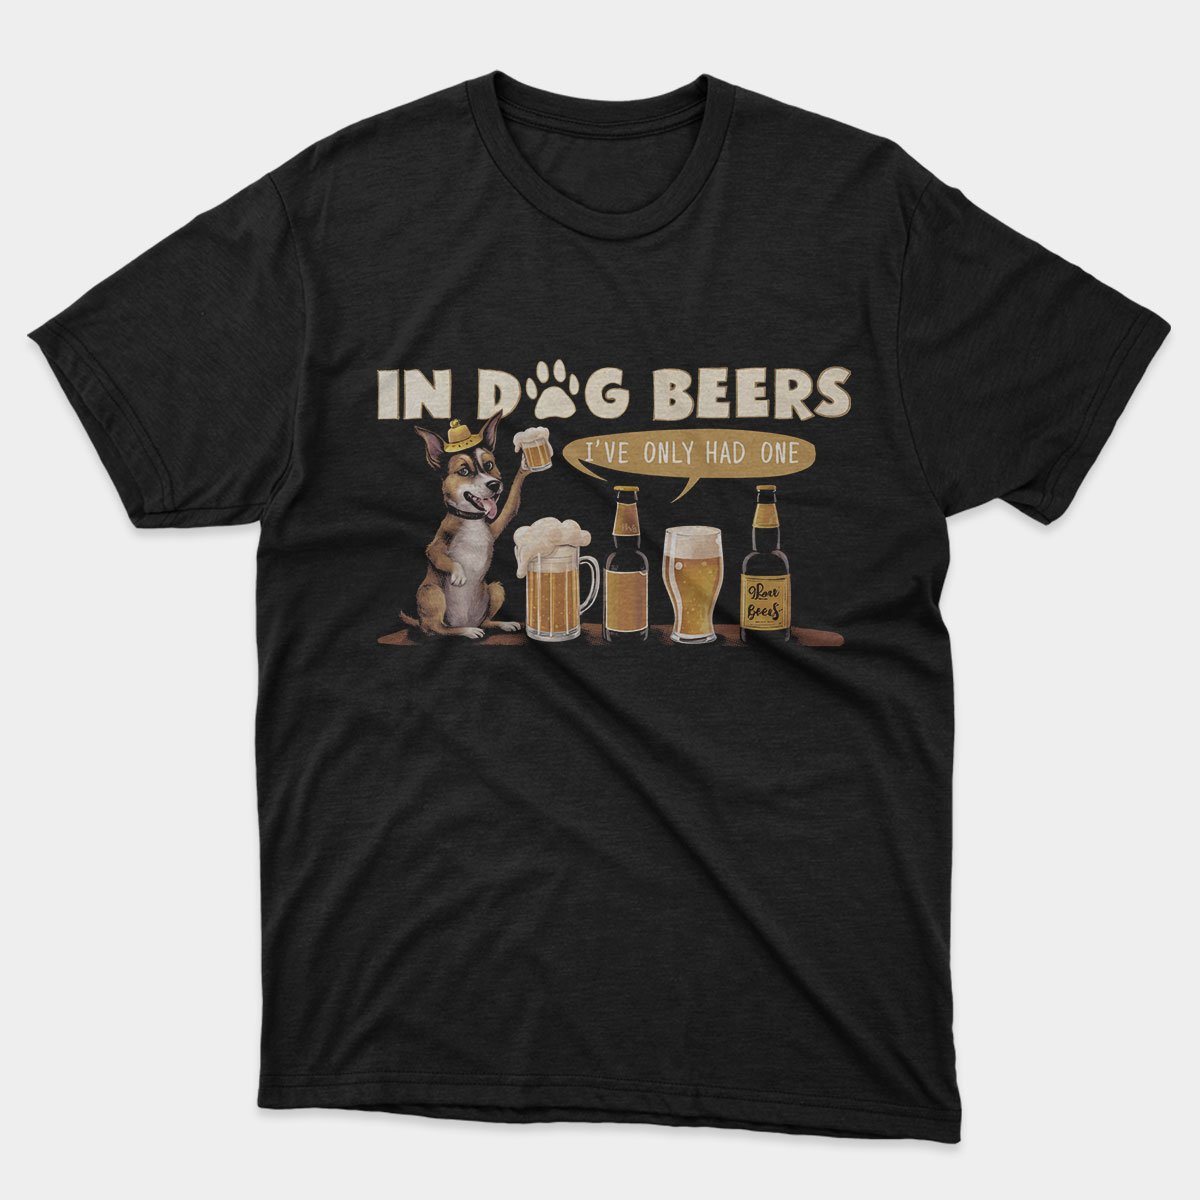 In Dog Beers T-shirt